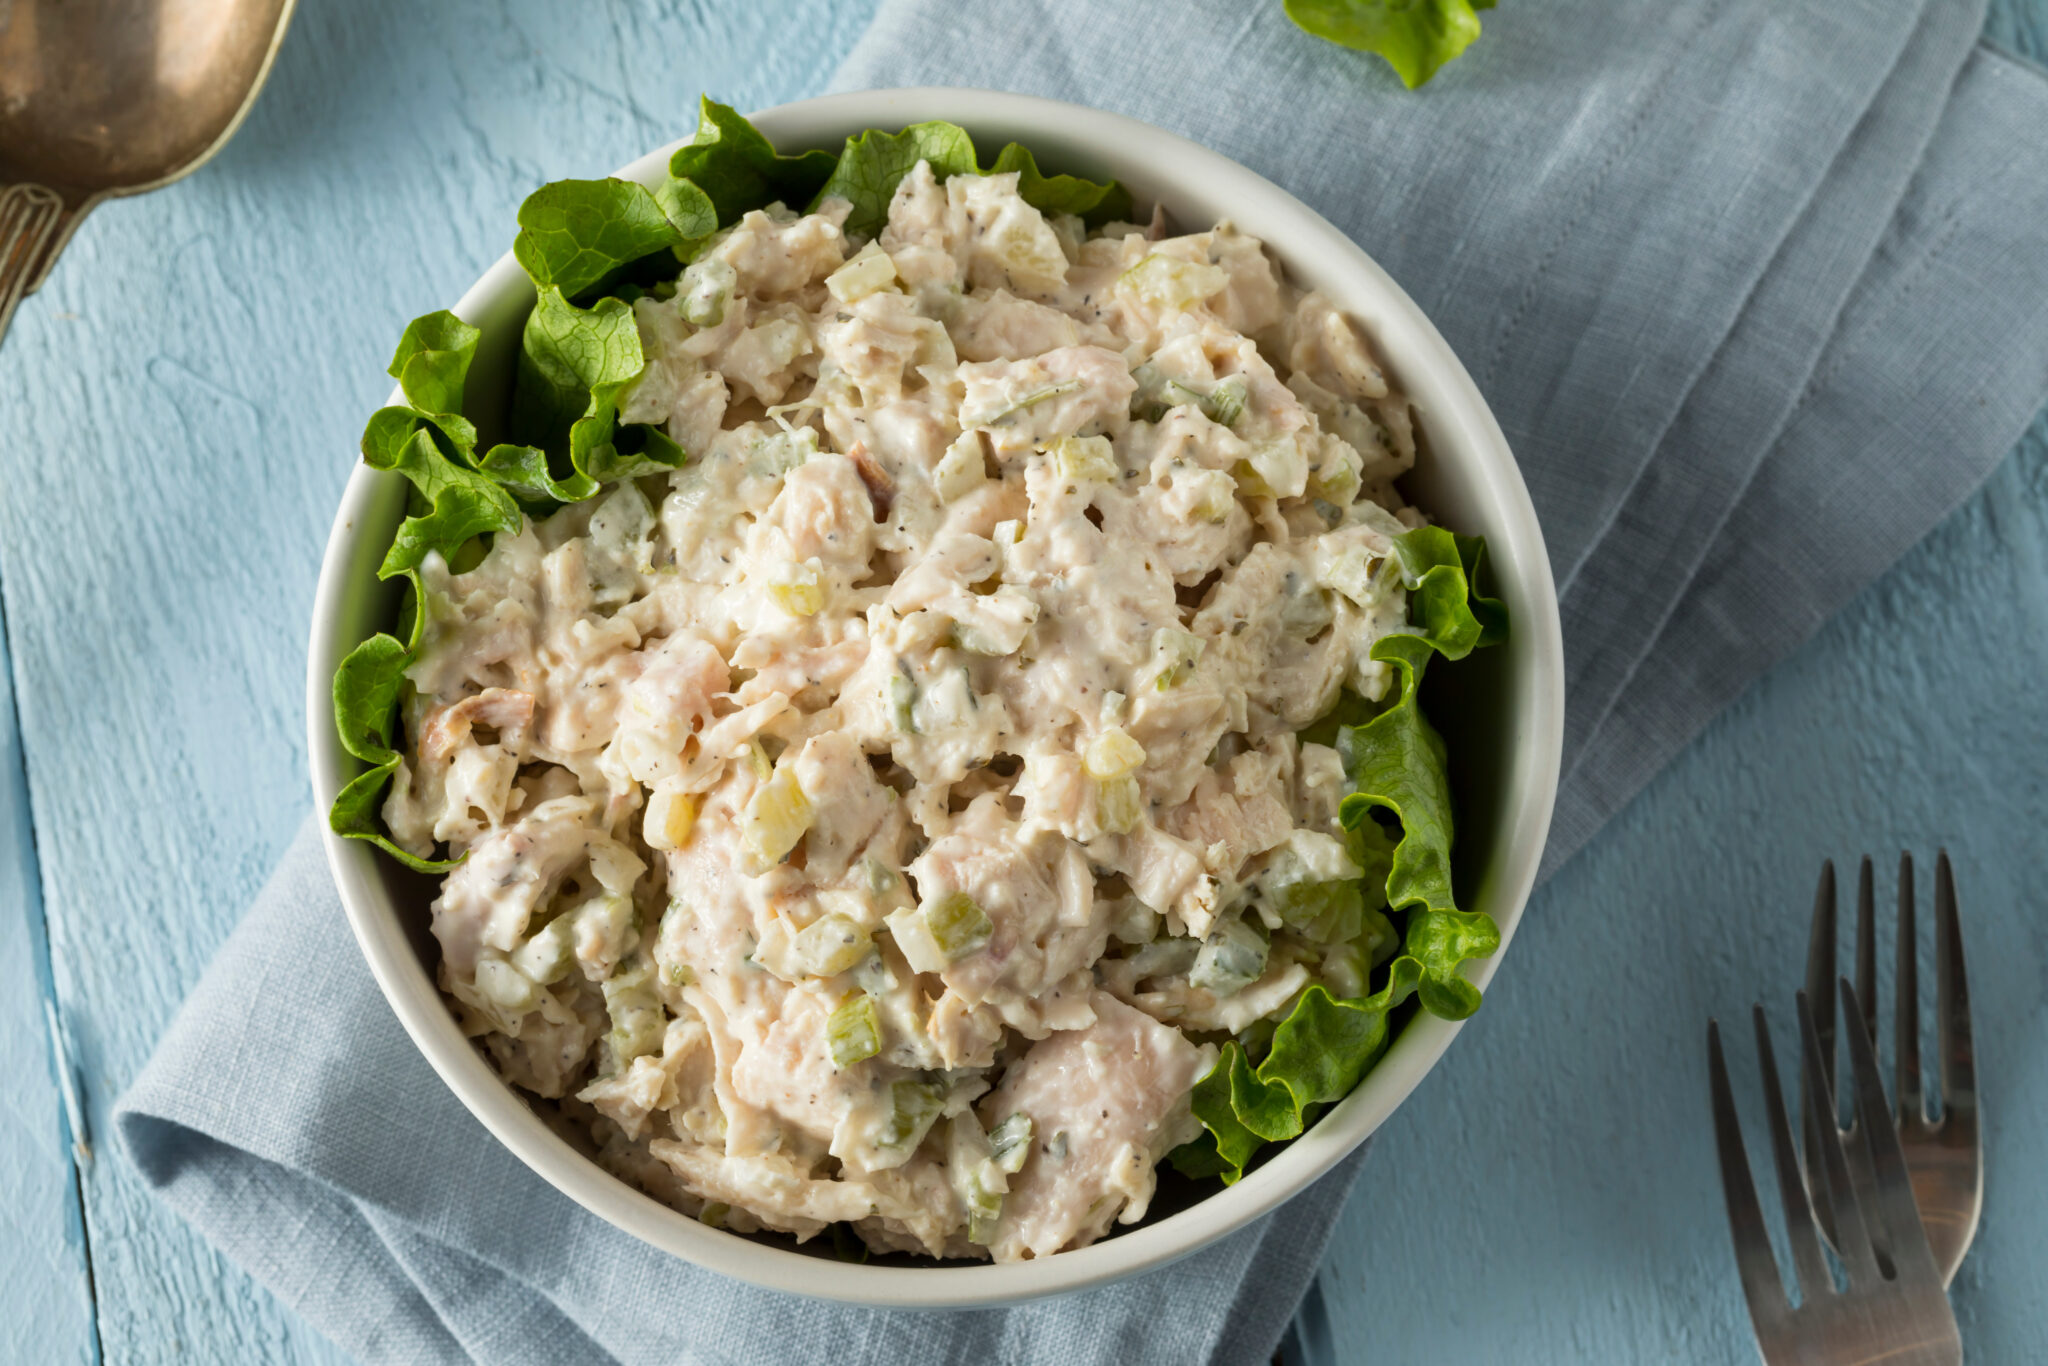 How To Make Easy Rotisserie Chicken Salad